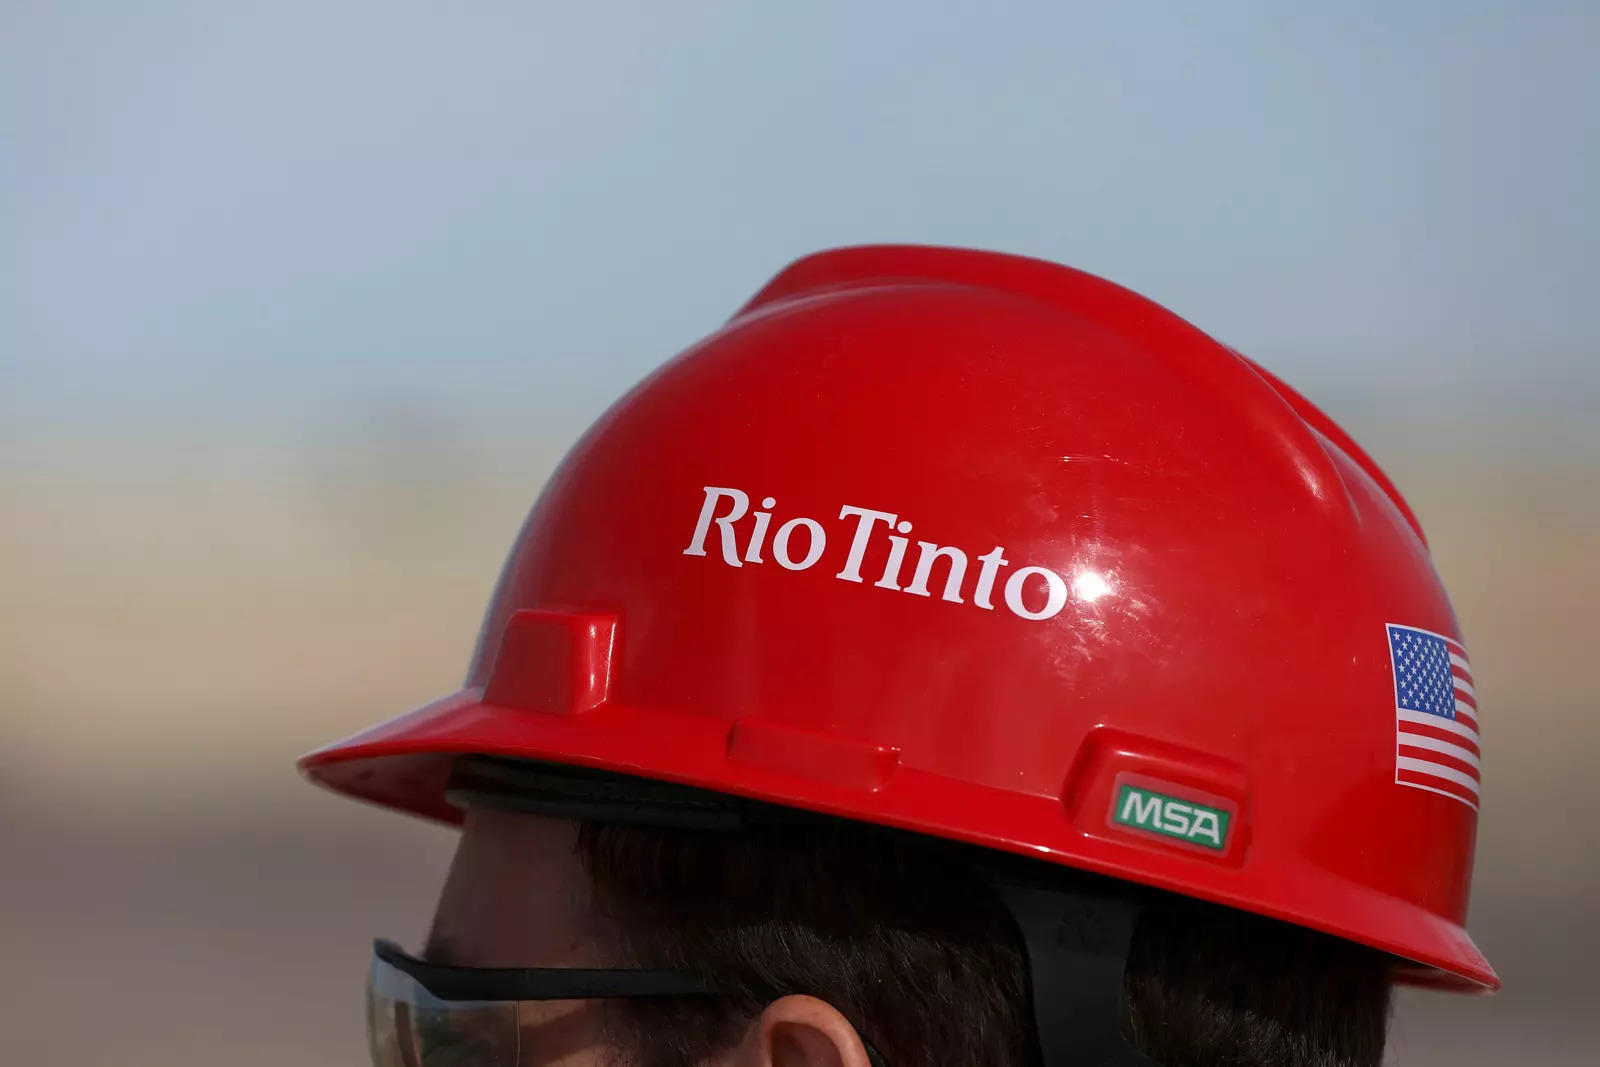  The vote clears the way for global mining giant Rio Tinto to gain more autonomy over Oyu Tolgoi.